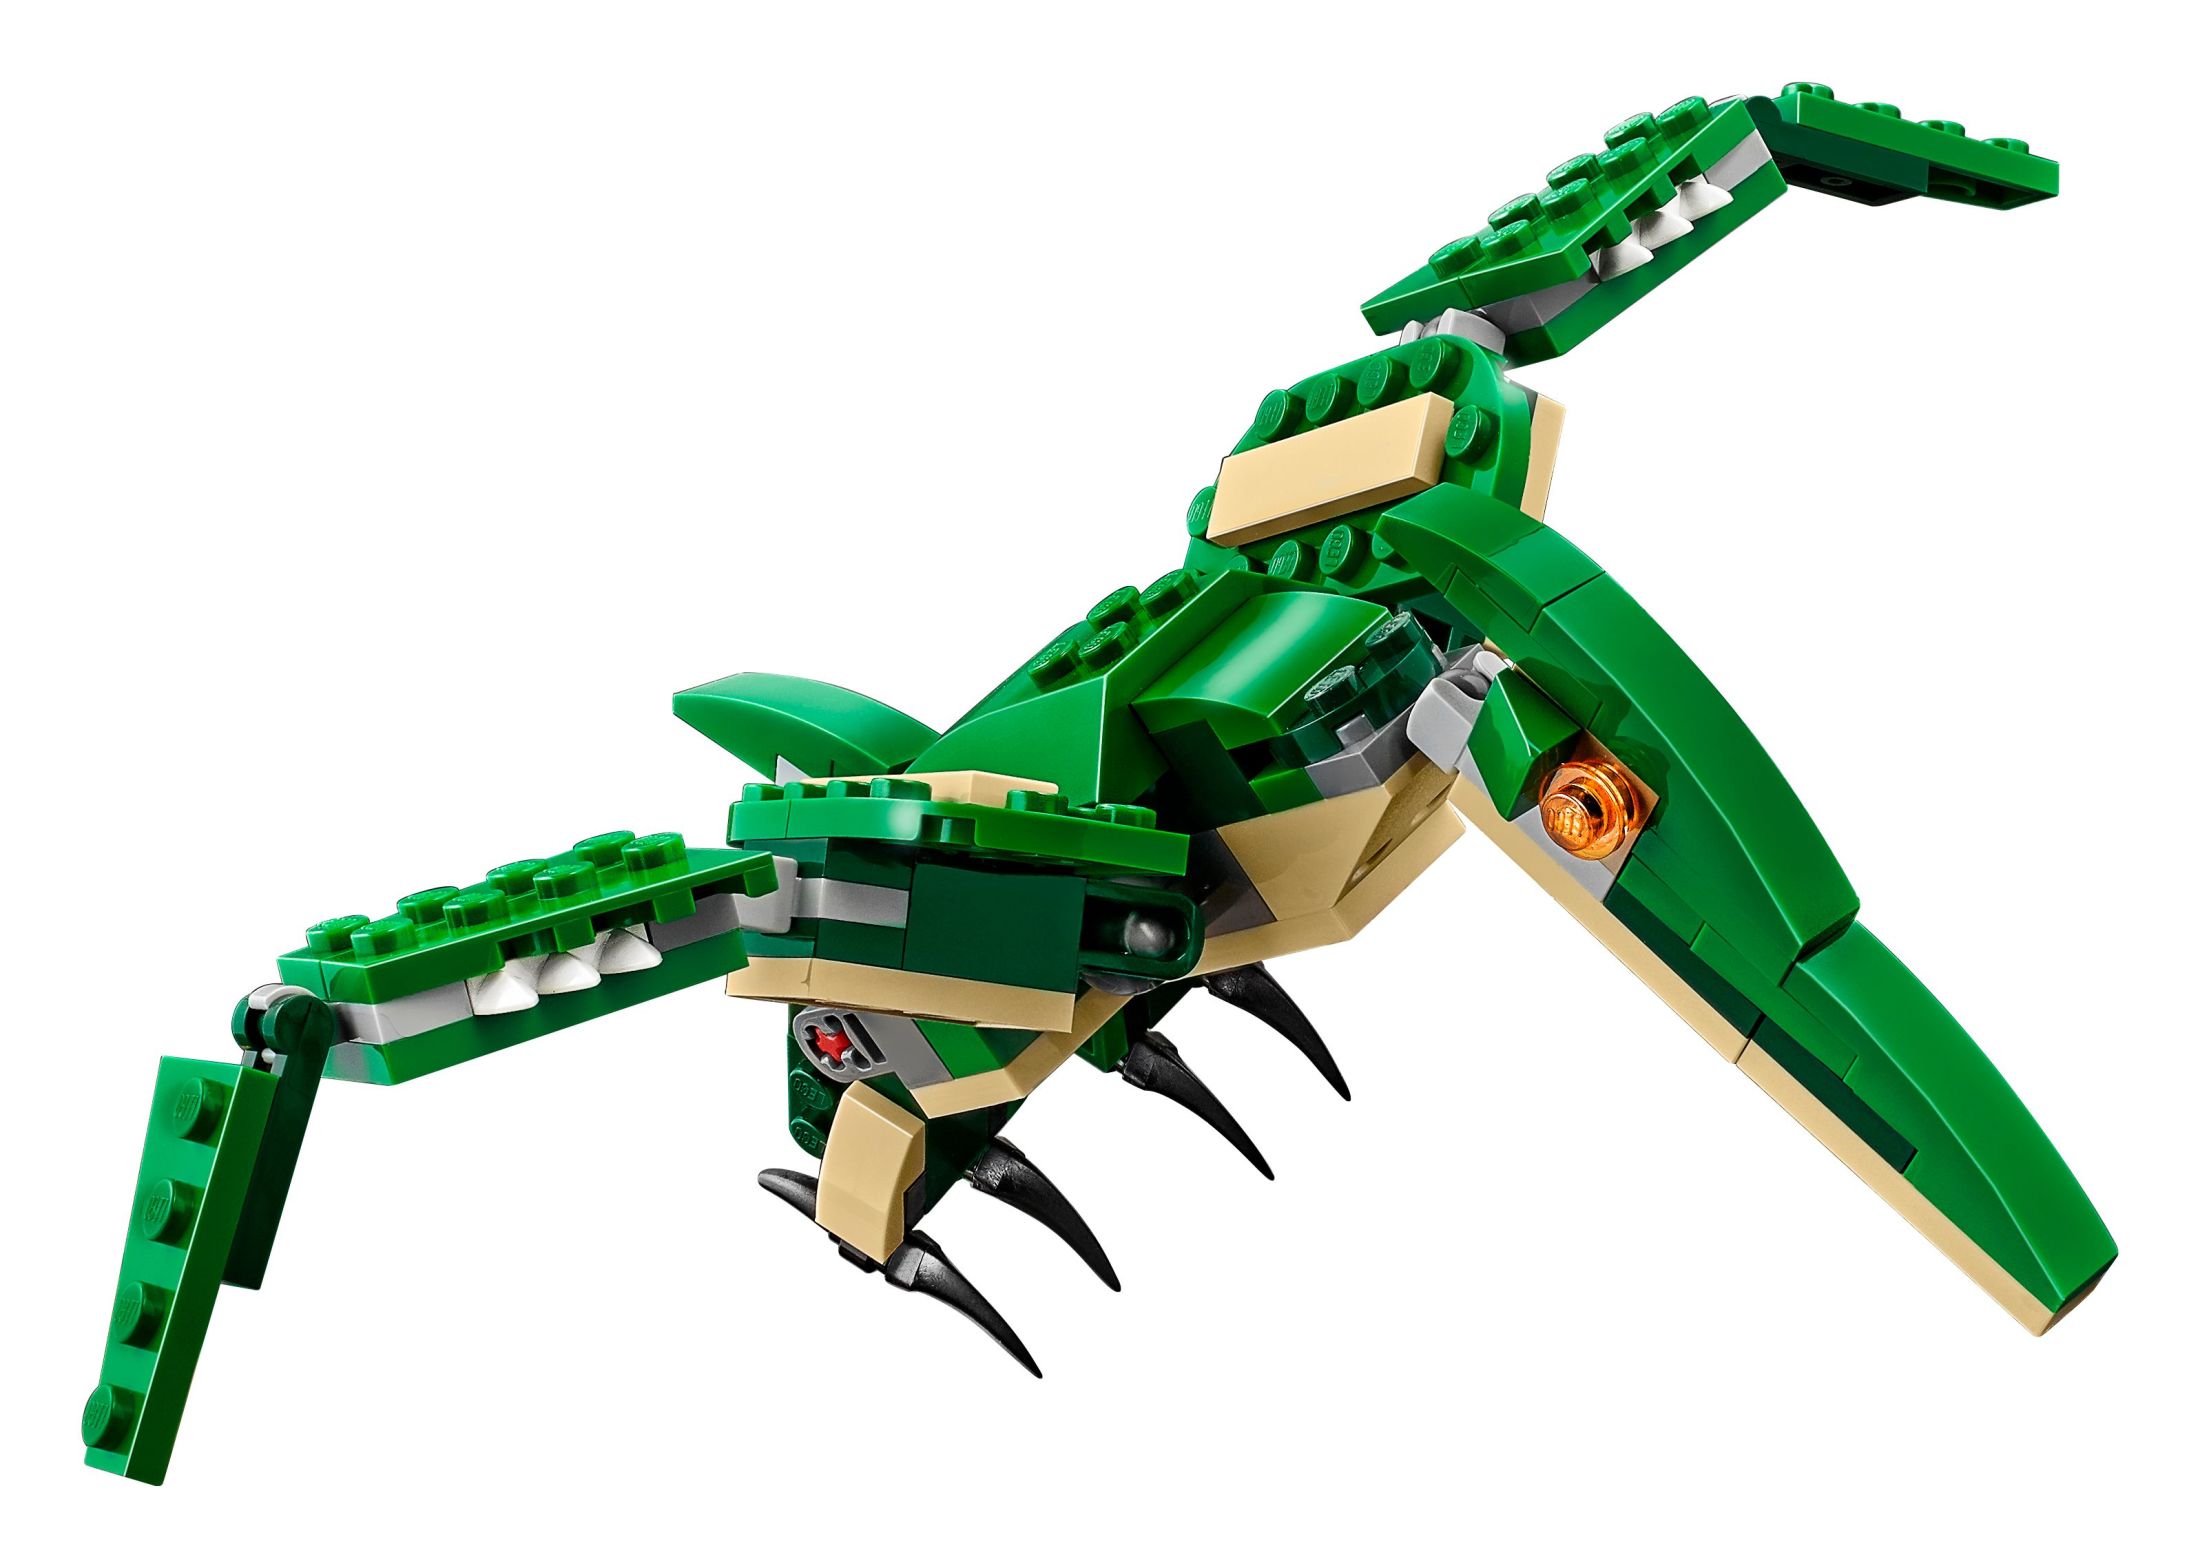 LEGO Creator 3 in 1 Mighty Dinosaur Toy, Transforms from T. rex to Triceratops to Pterodactyl Dinosaur Figures, Great Gift for 7 - 12 Year Old Boys & Girls, 31058 - image 5 of 6